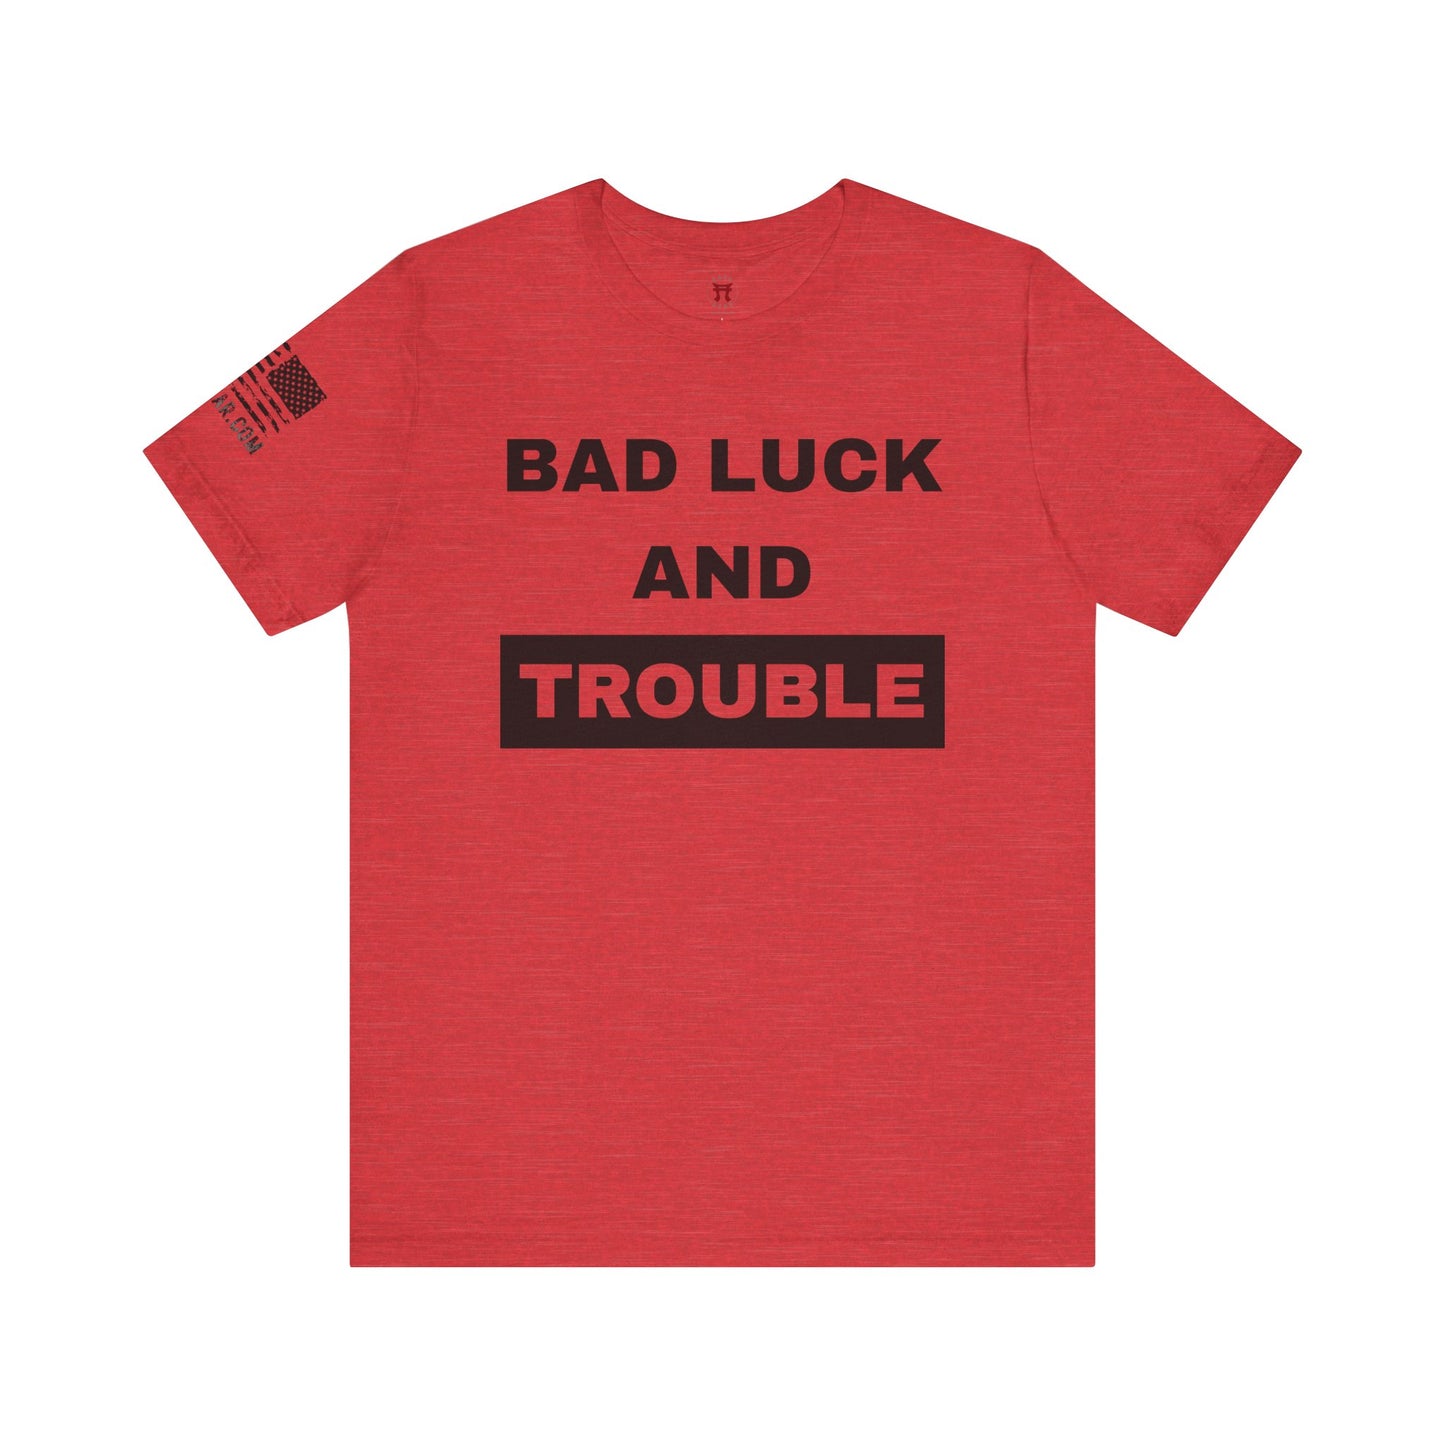 Rakkgear Men's Bad Luck and Trouble Short Sleeve Tee in Red